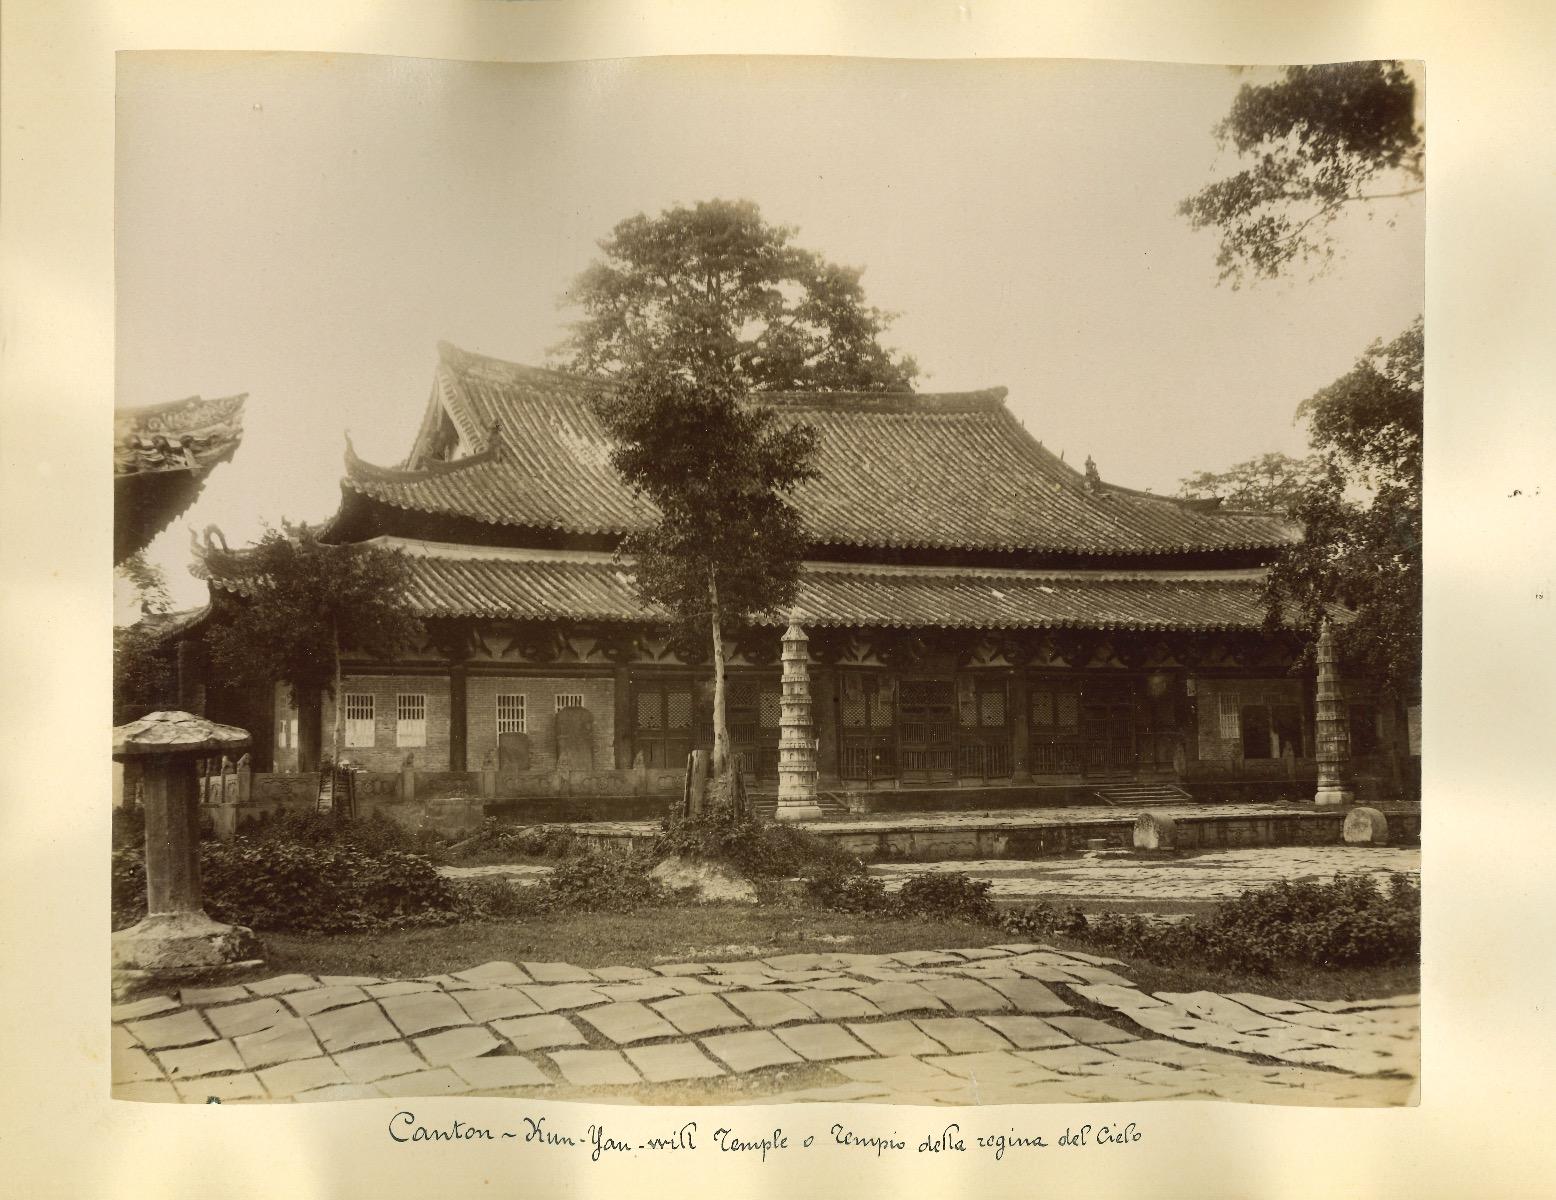 Unknown Landscape Photograph - Ancient views of the Temple of the Queen of the Sky in Canton - 1890s